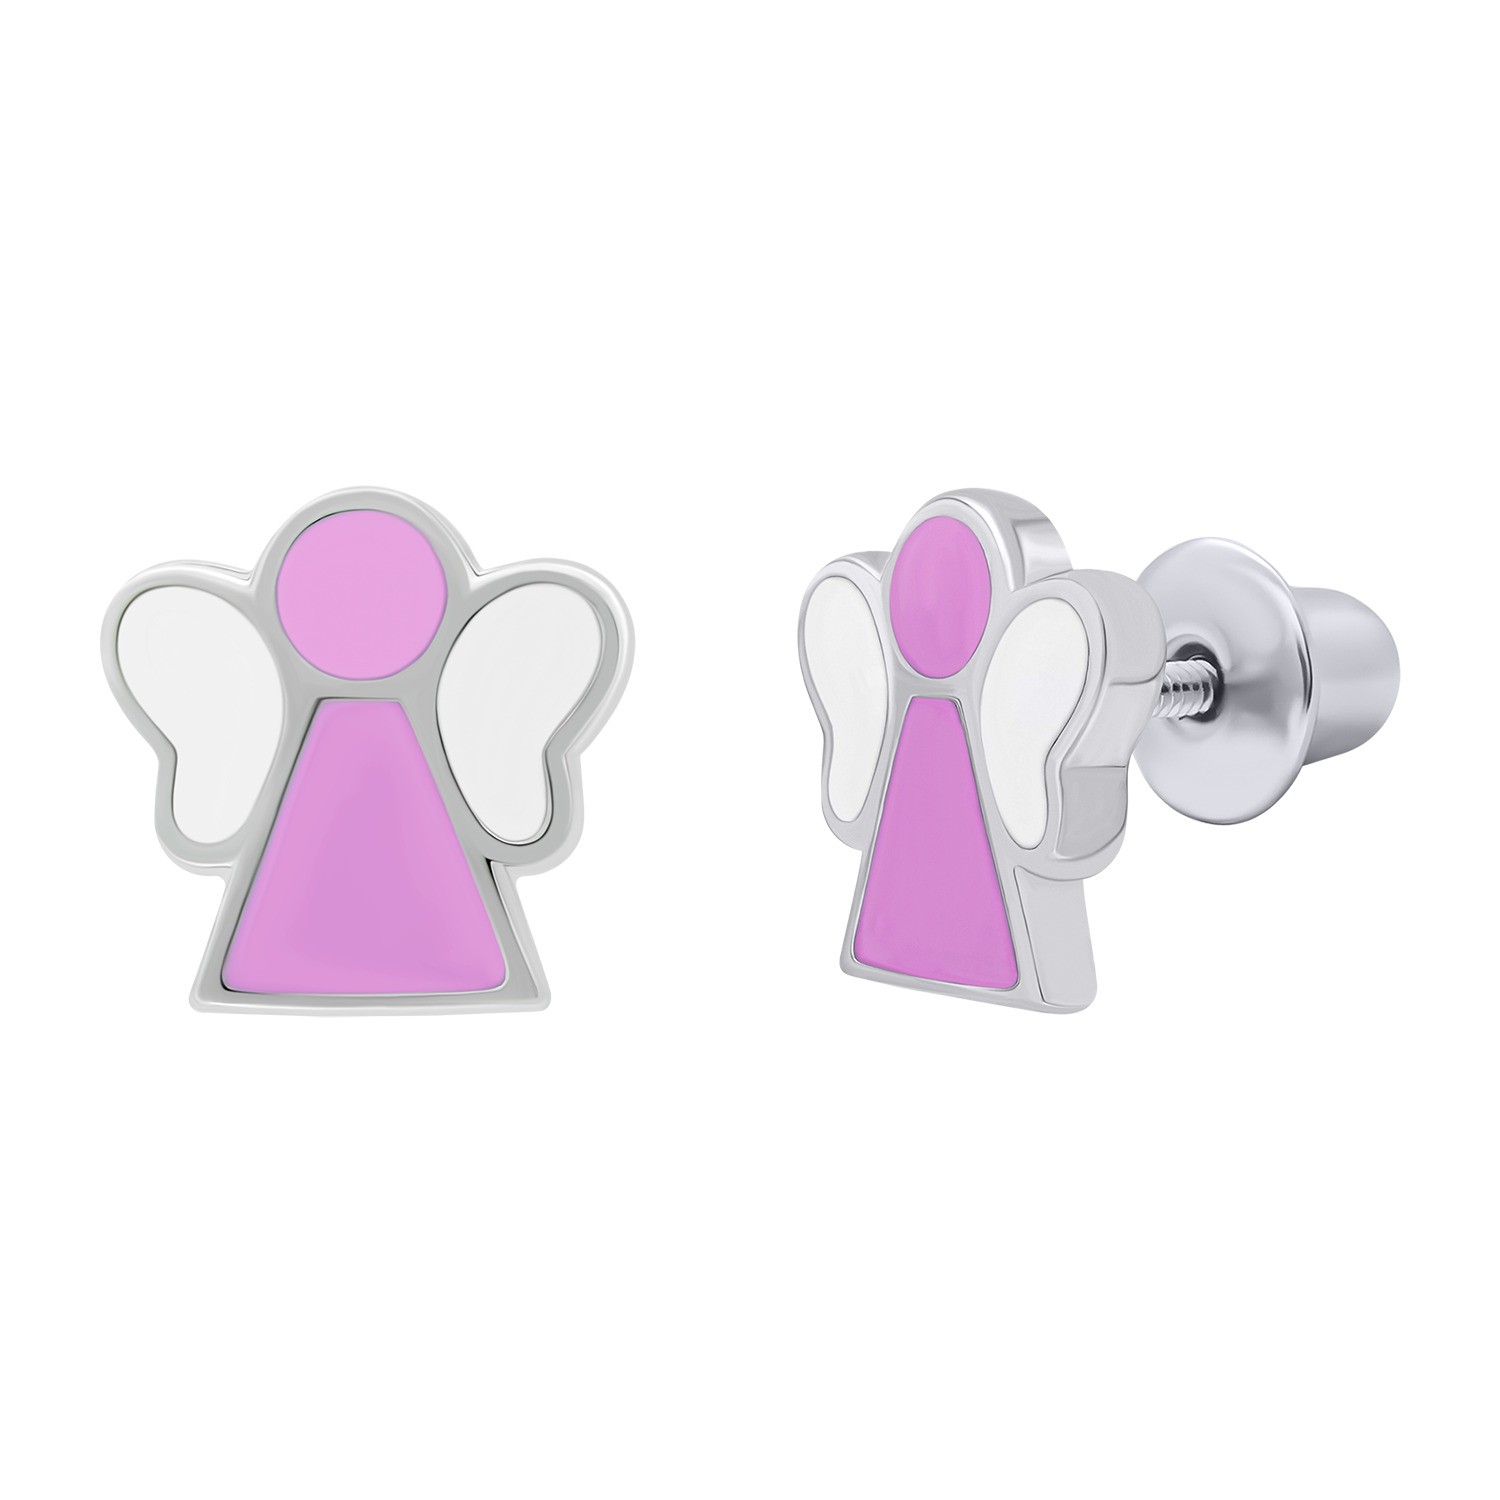 Earrings Angel with pink and white enamel